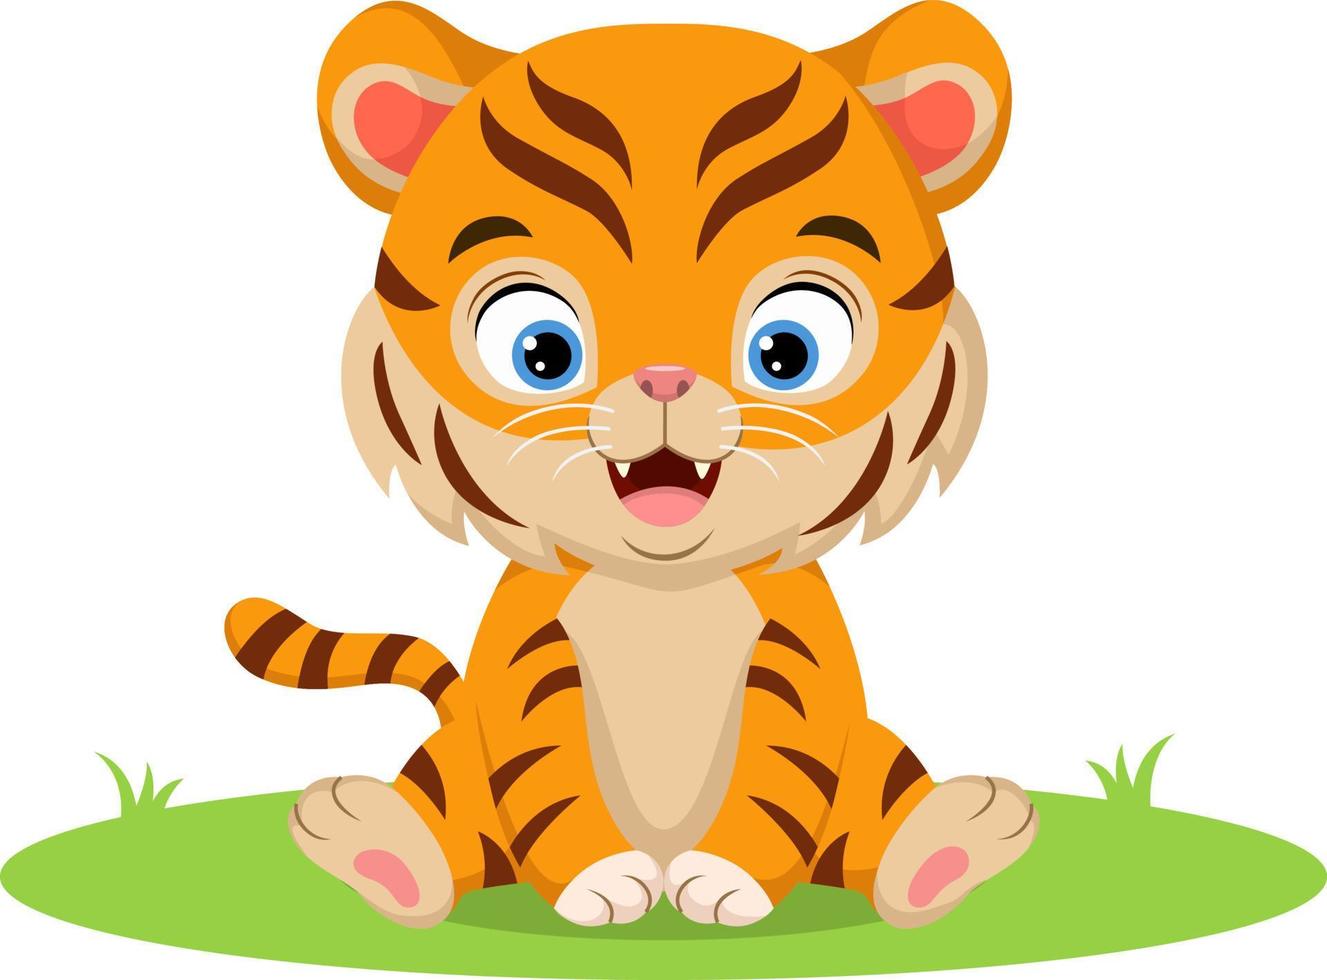 Cute baby tiger sitting in the grass vector